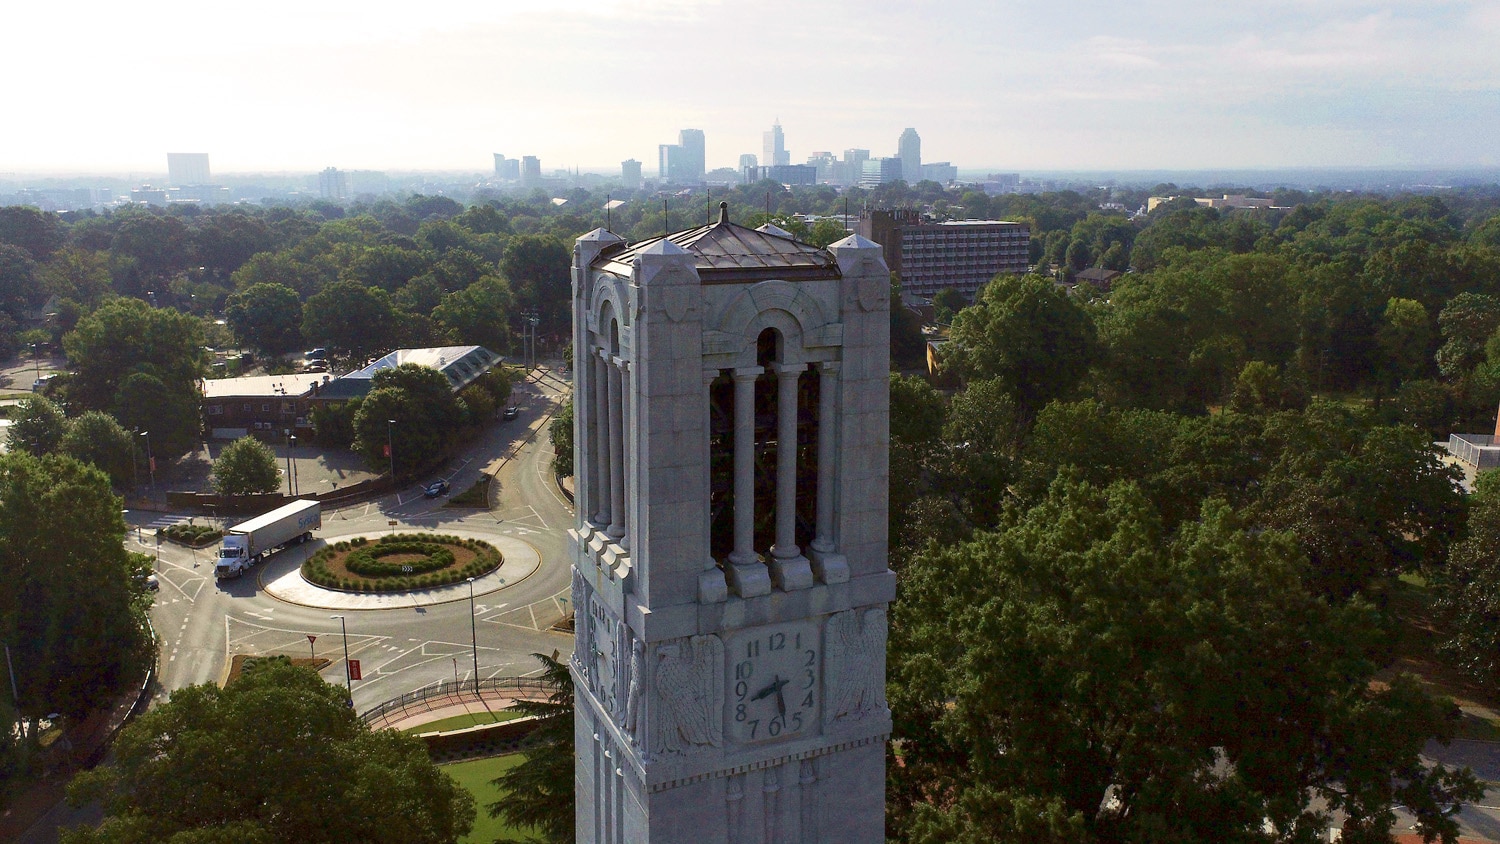 The Memorial Belltower with the Raleigh skyline in the background.